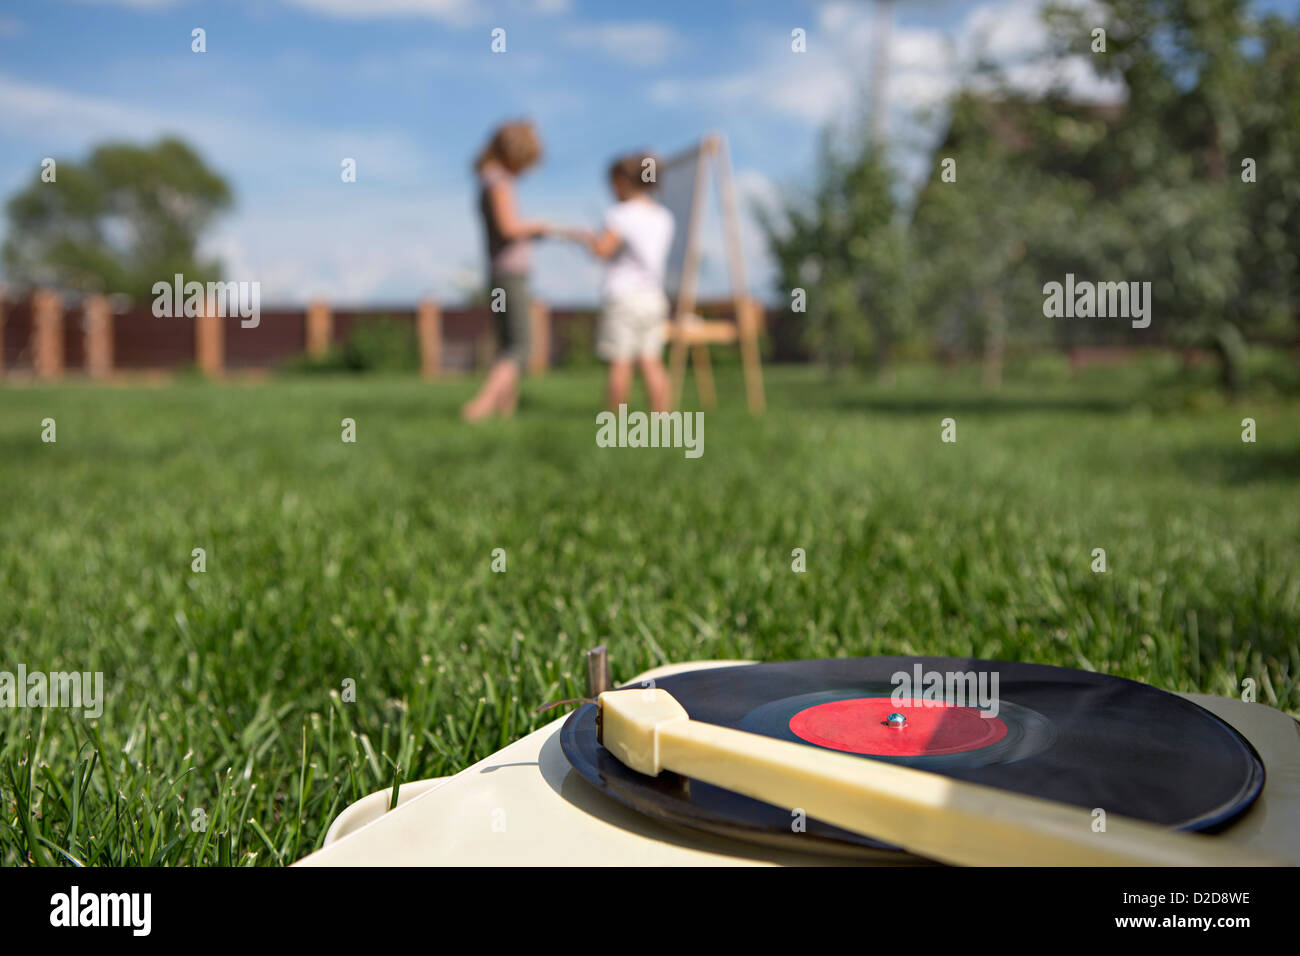 An old-fashioned record player on a lawn, children in background Stock Photo